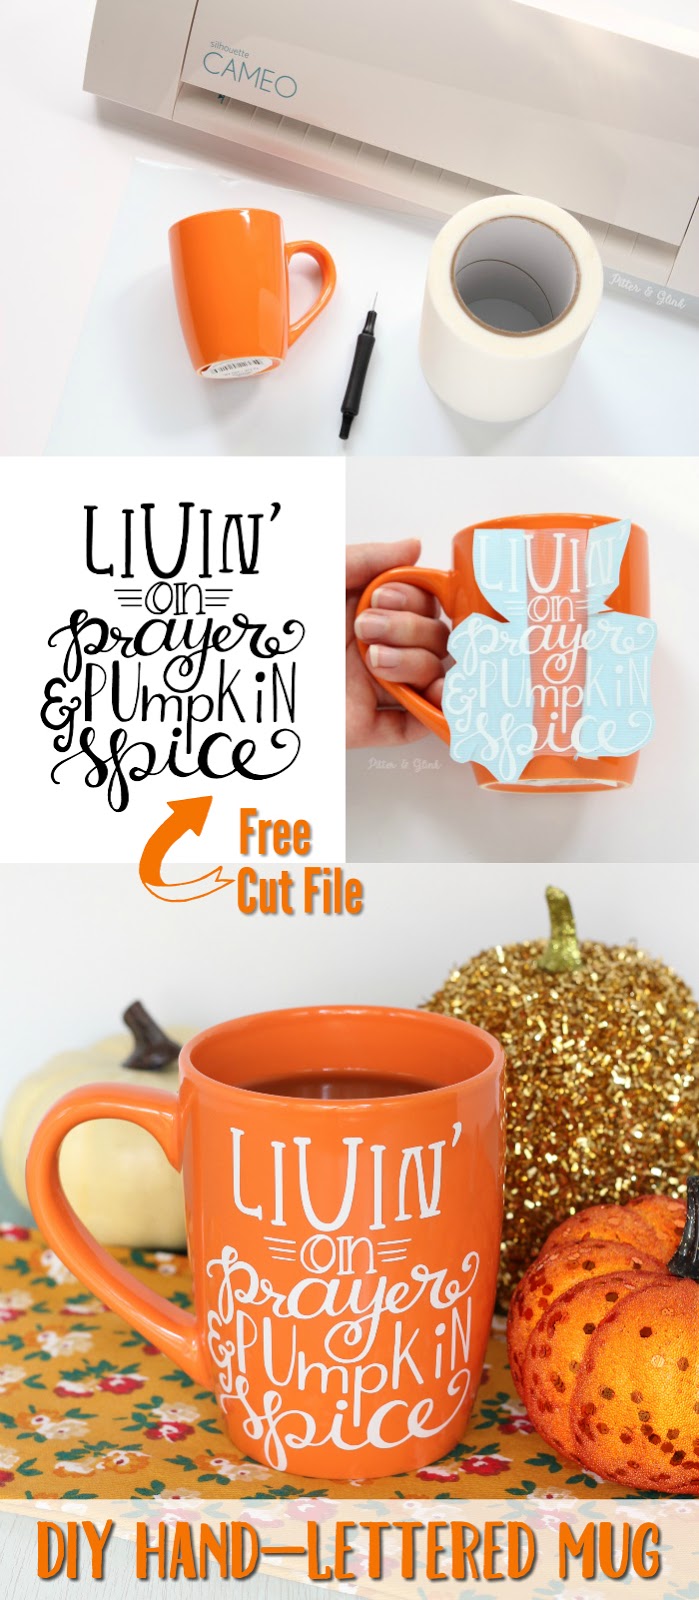 Share Your Love for Pumpkin Spice with This $2 DIY Mug.  Free hand-lettered SVG and Silhouette Studio cut files in post! pitterandglink.com